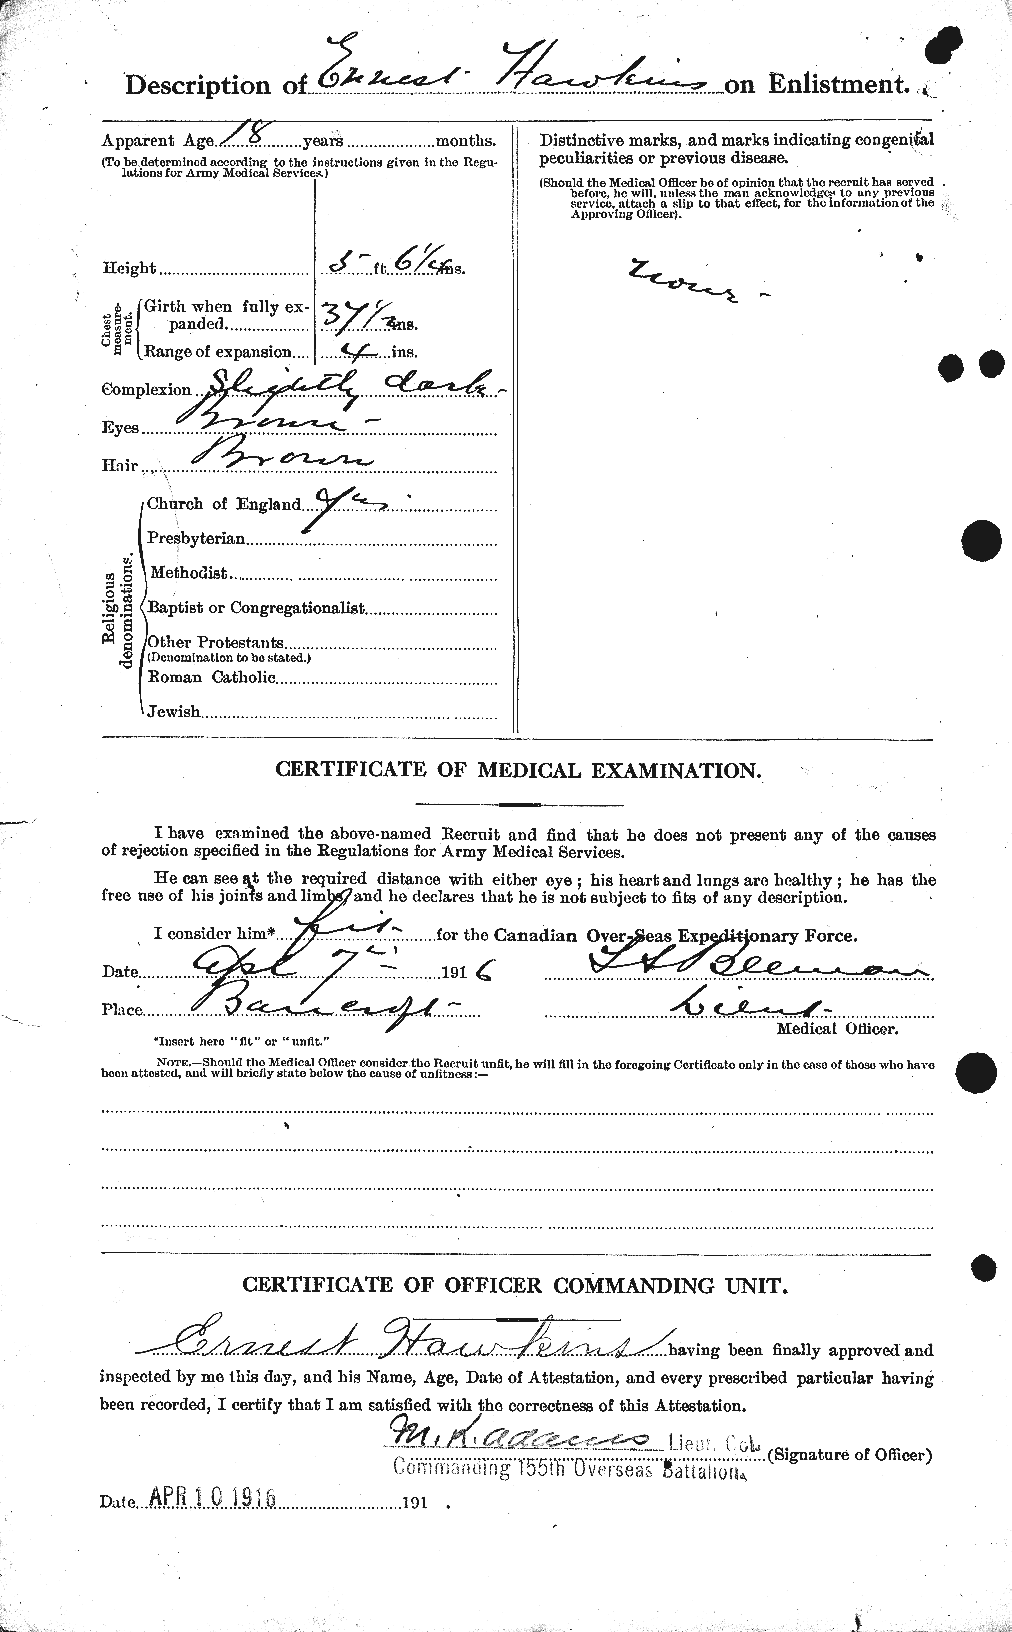 Personnel Records of the First World War - CEF 387083b